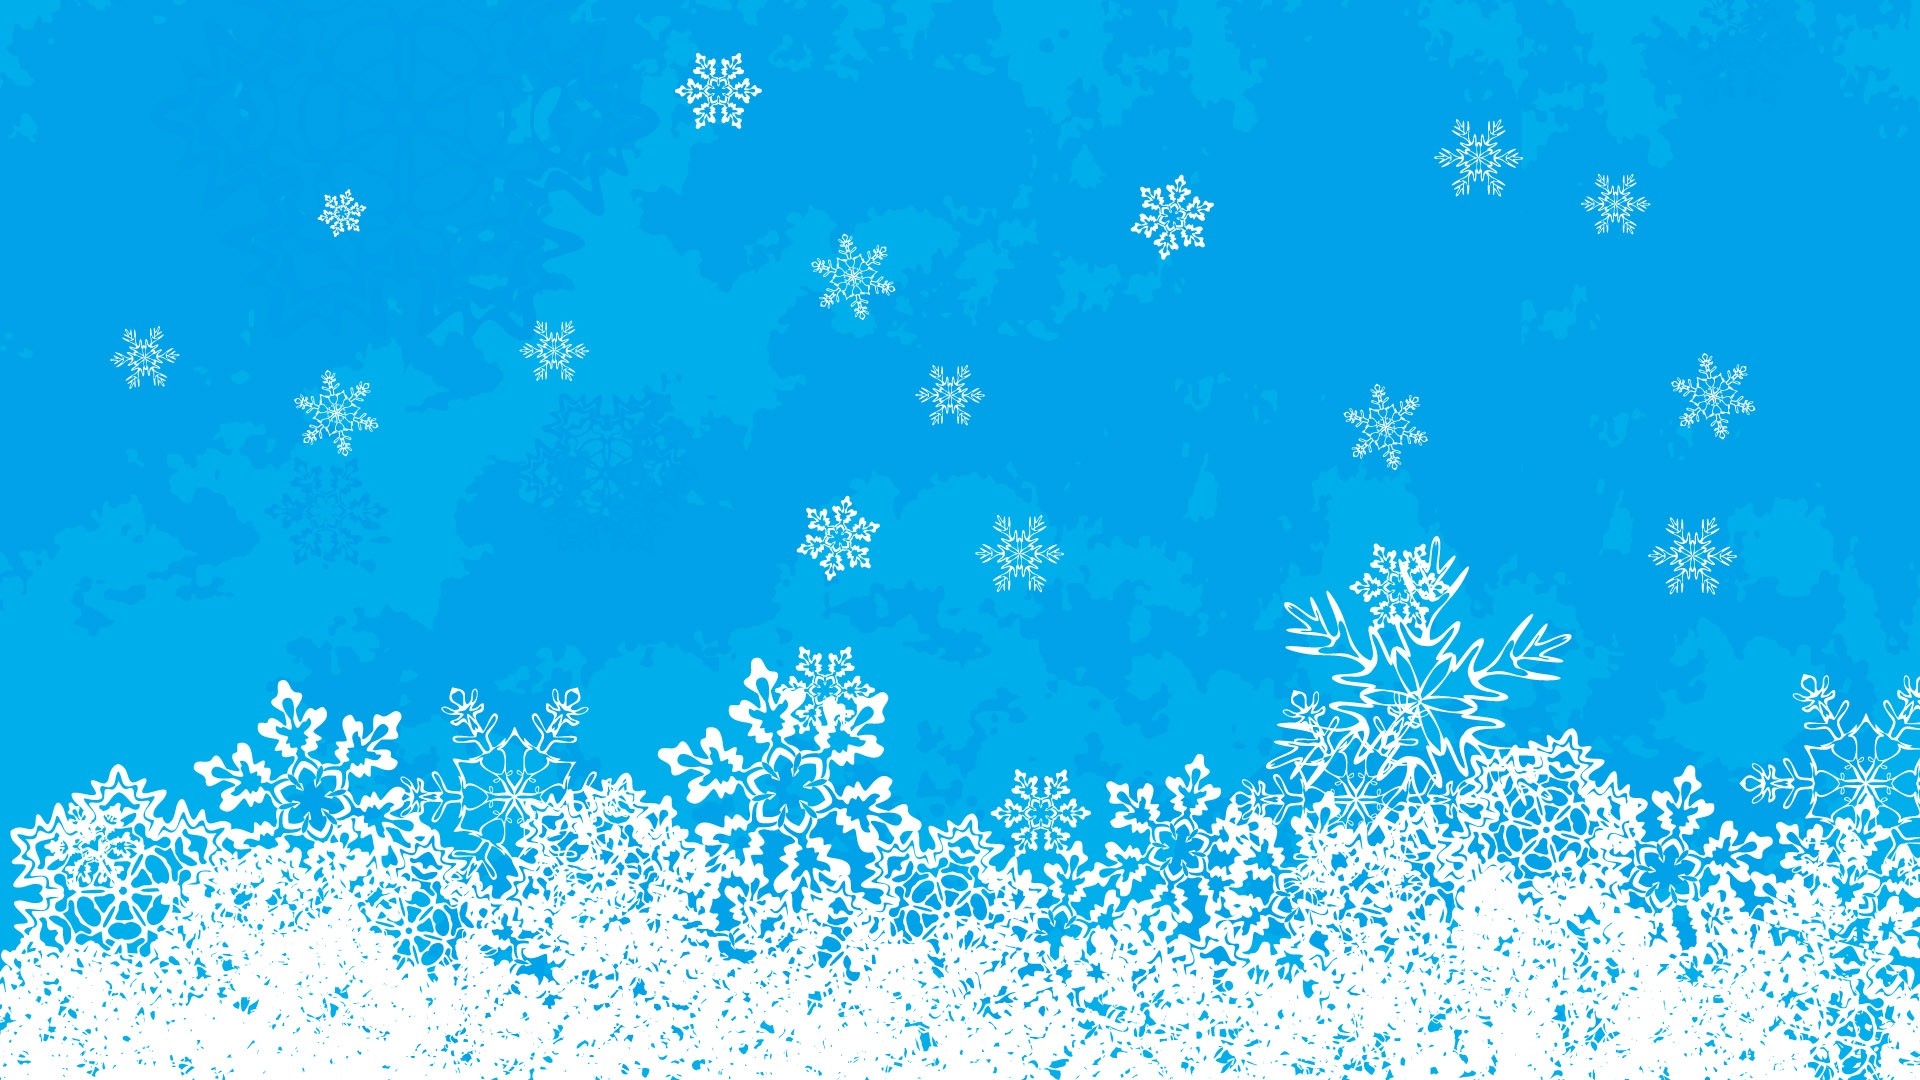 Wallpapers snowflake patterns background on the desktop